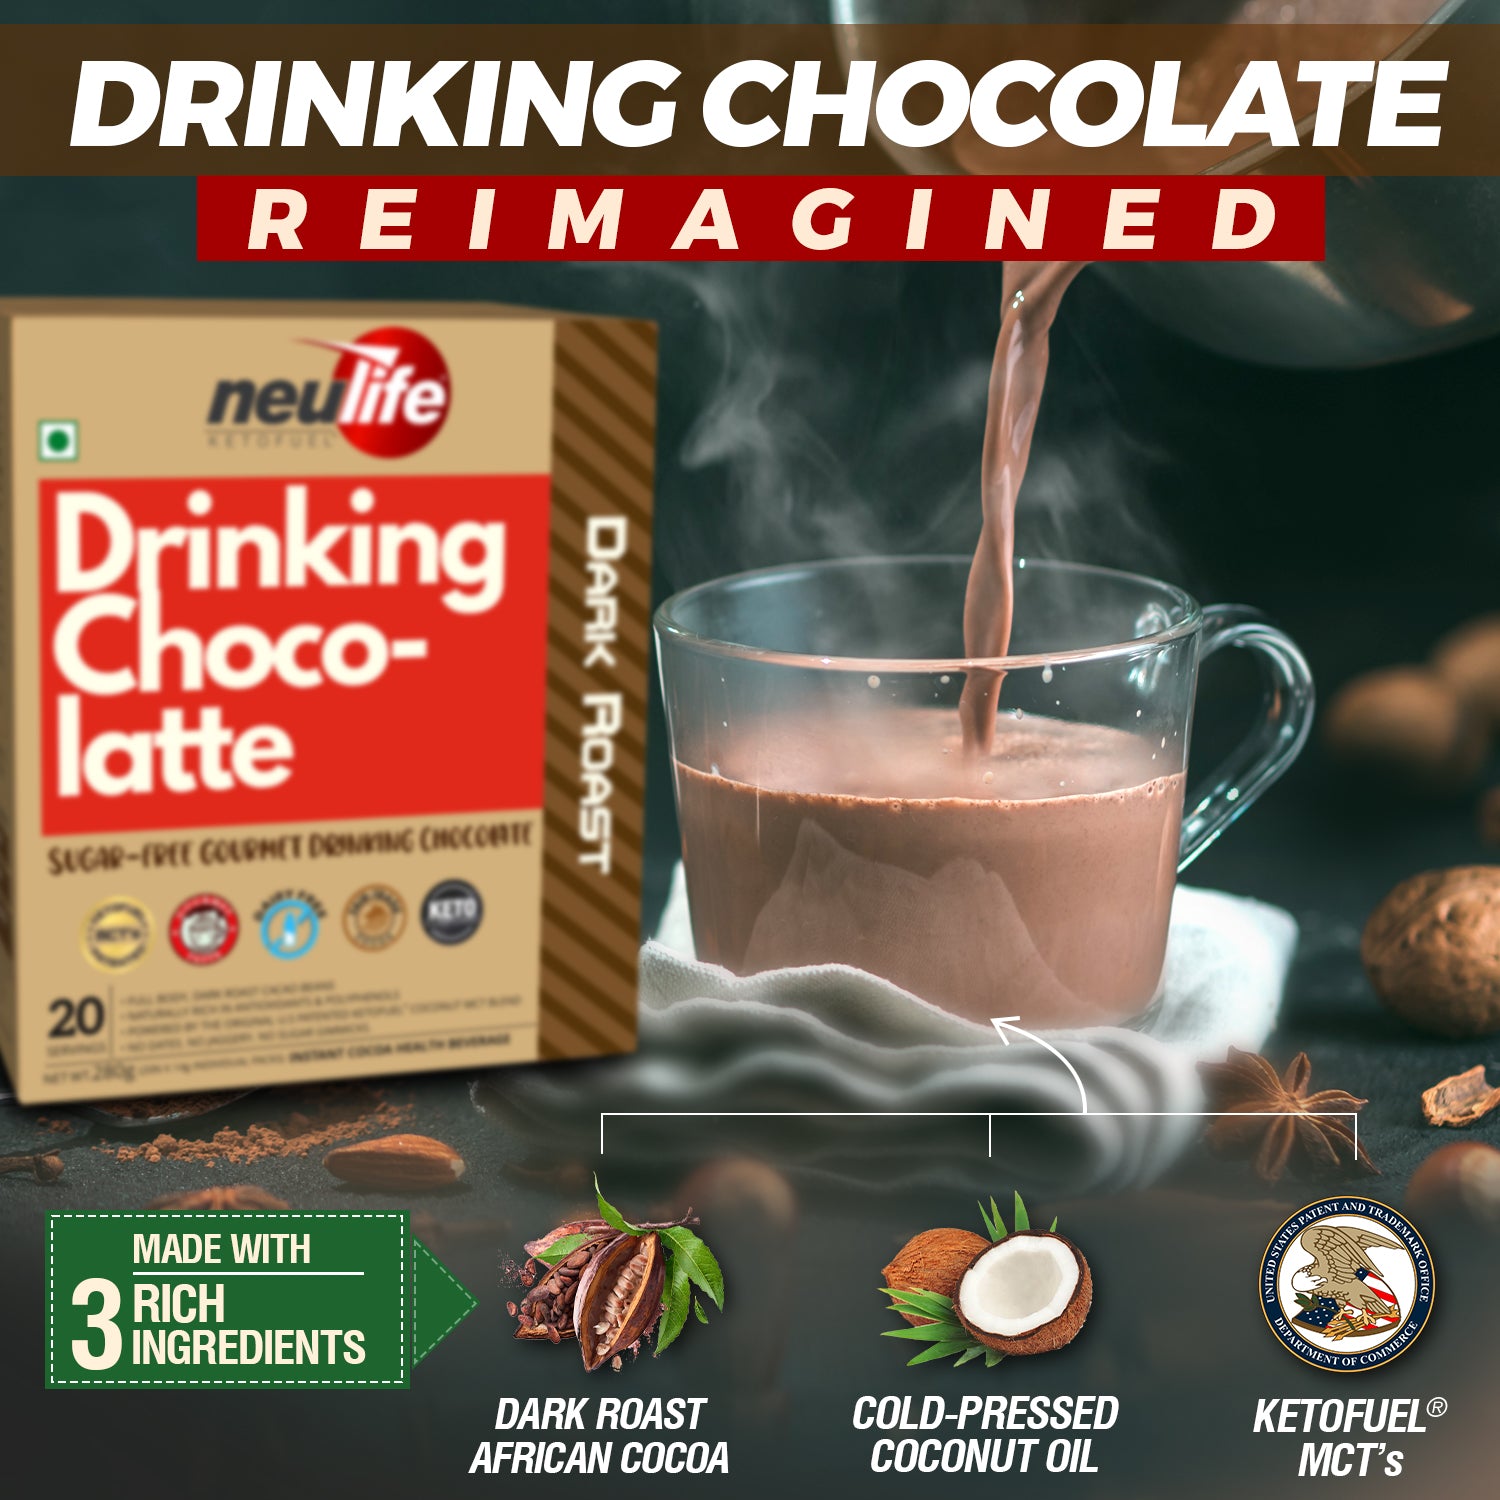 Drink Choco-latte with Rich Ingredients 